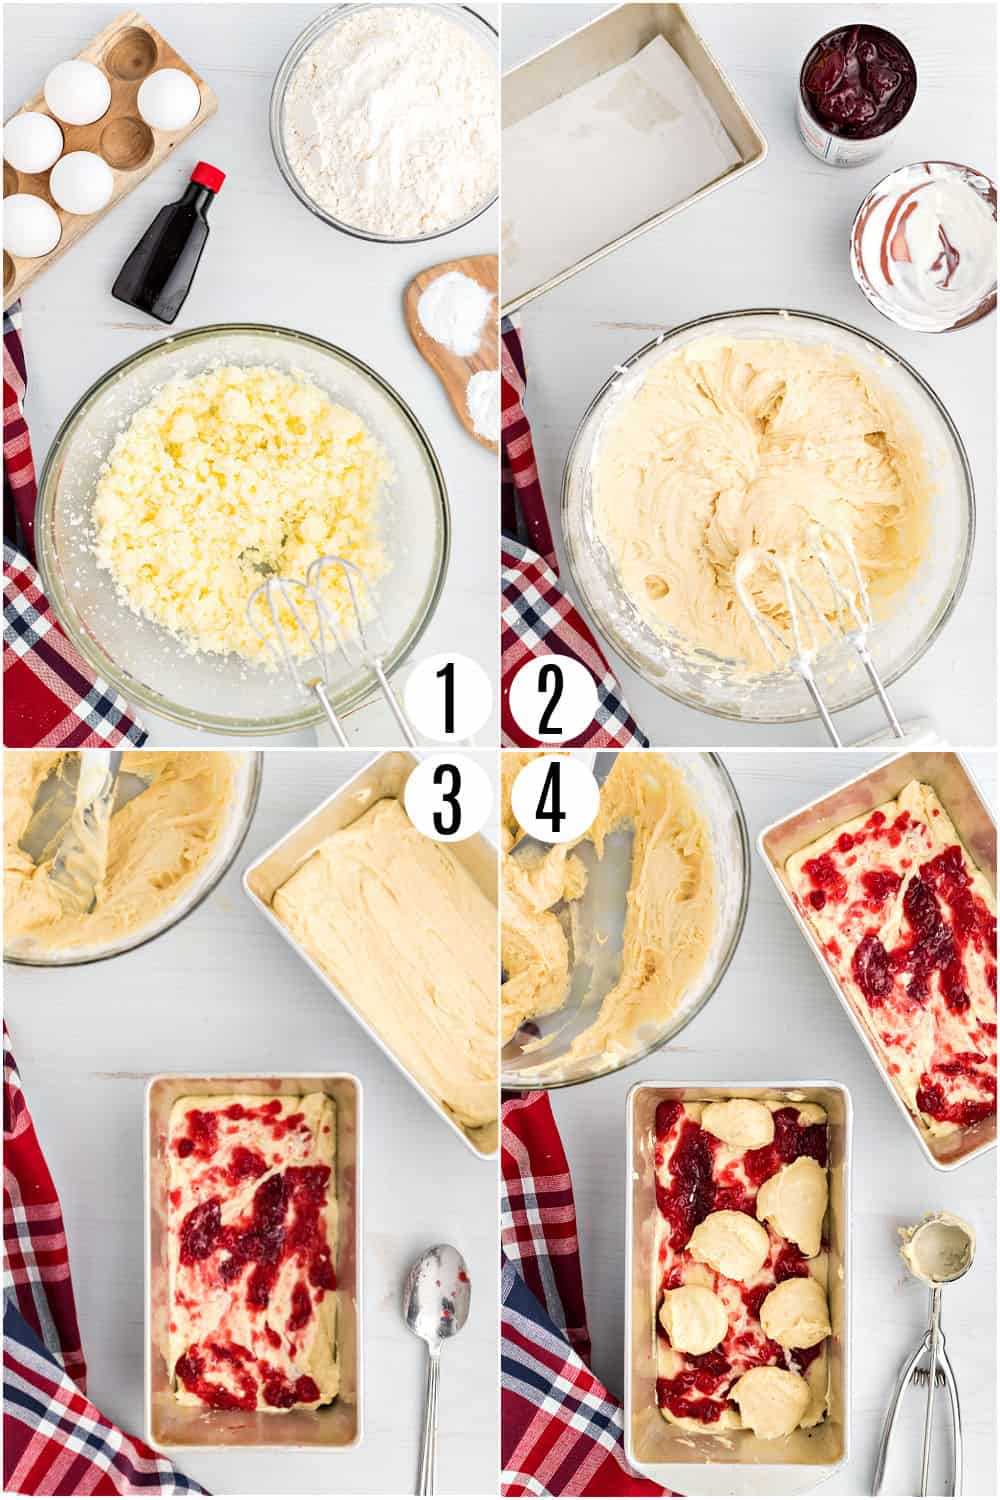 Step by step photos showing how to make cranberry almond bread.